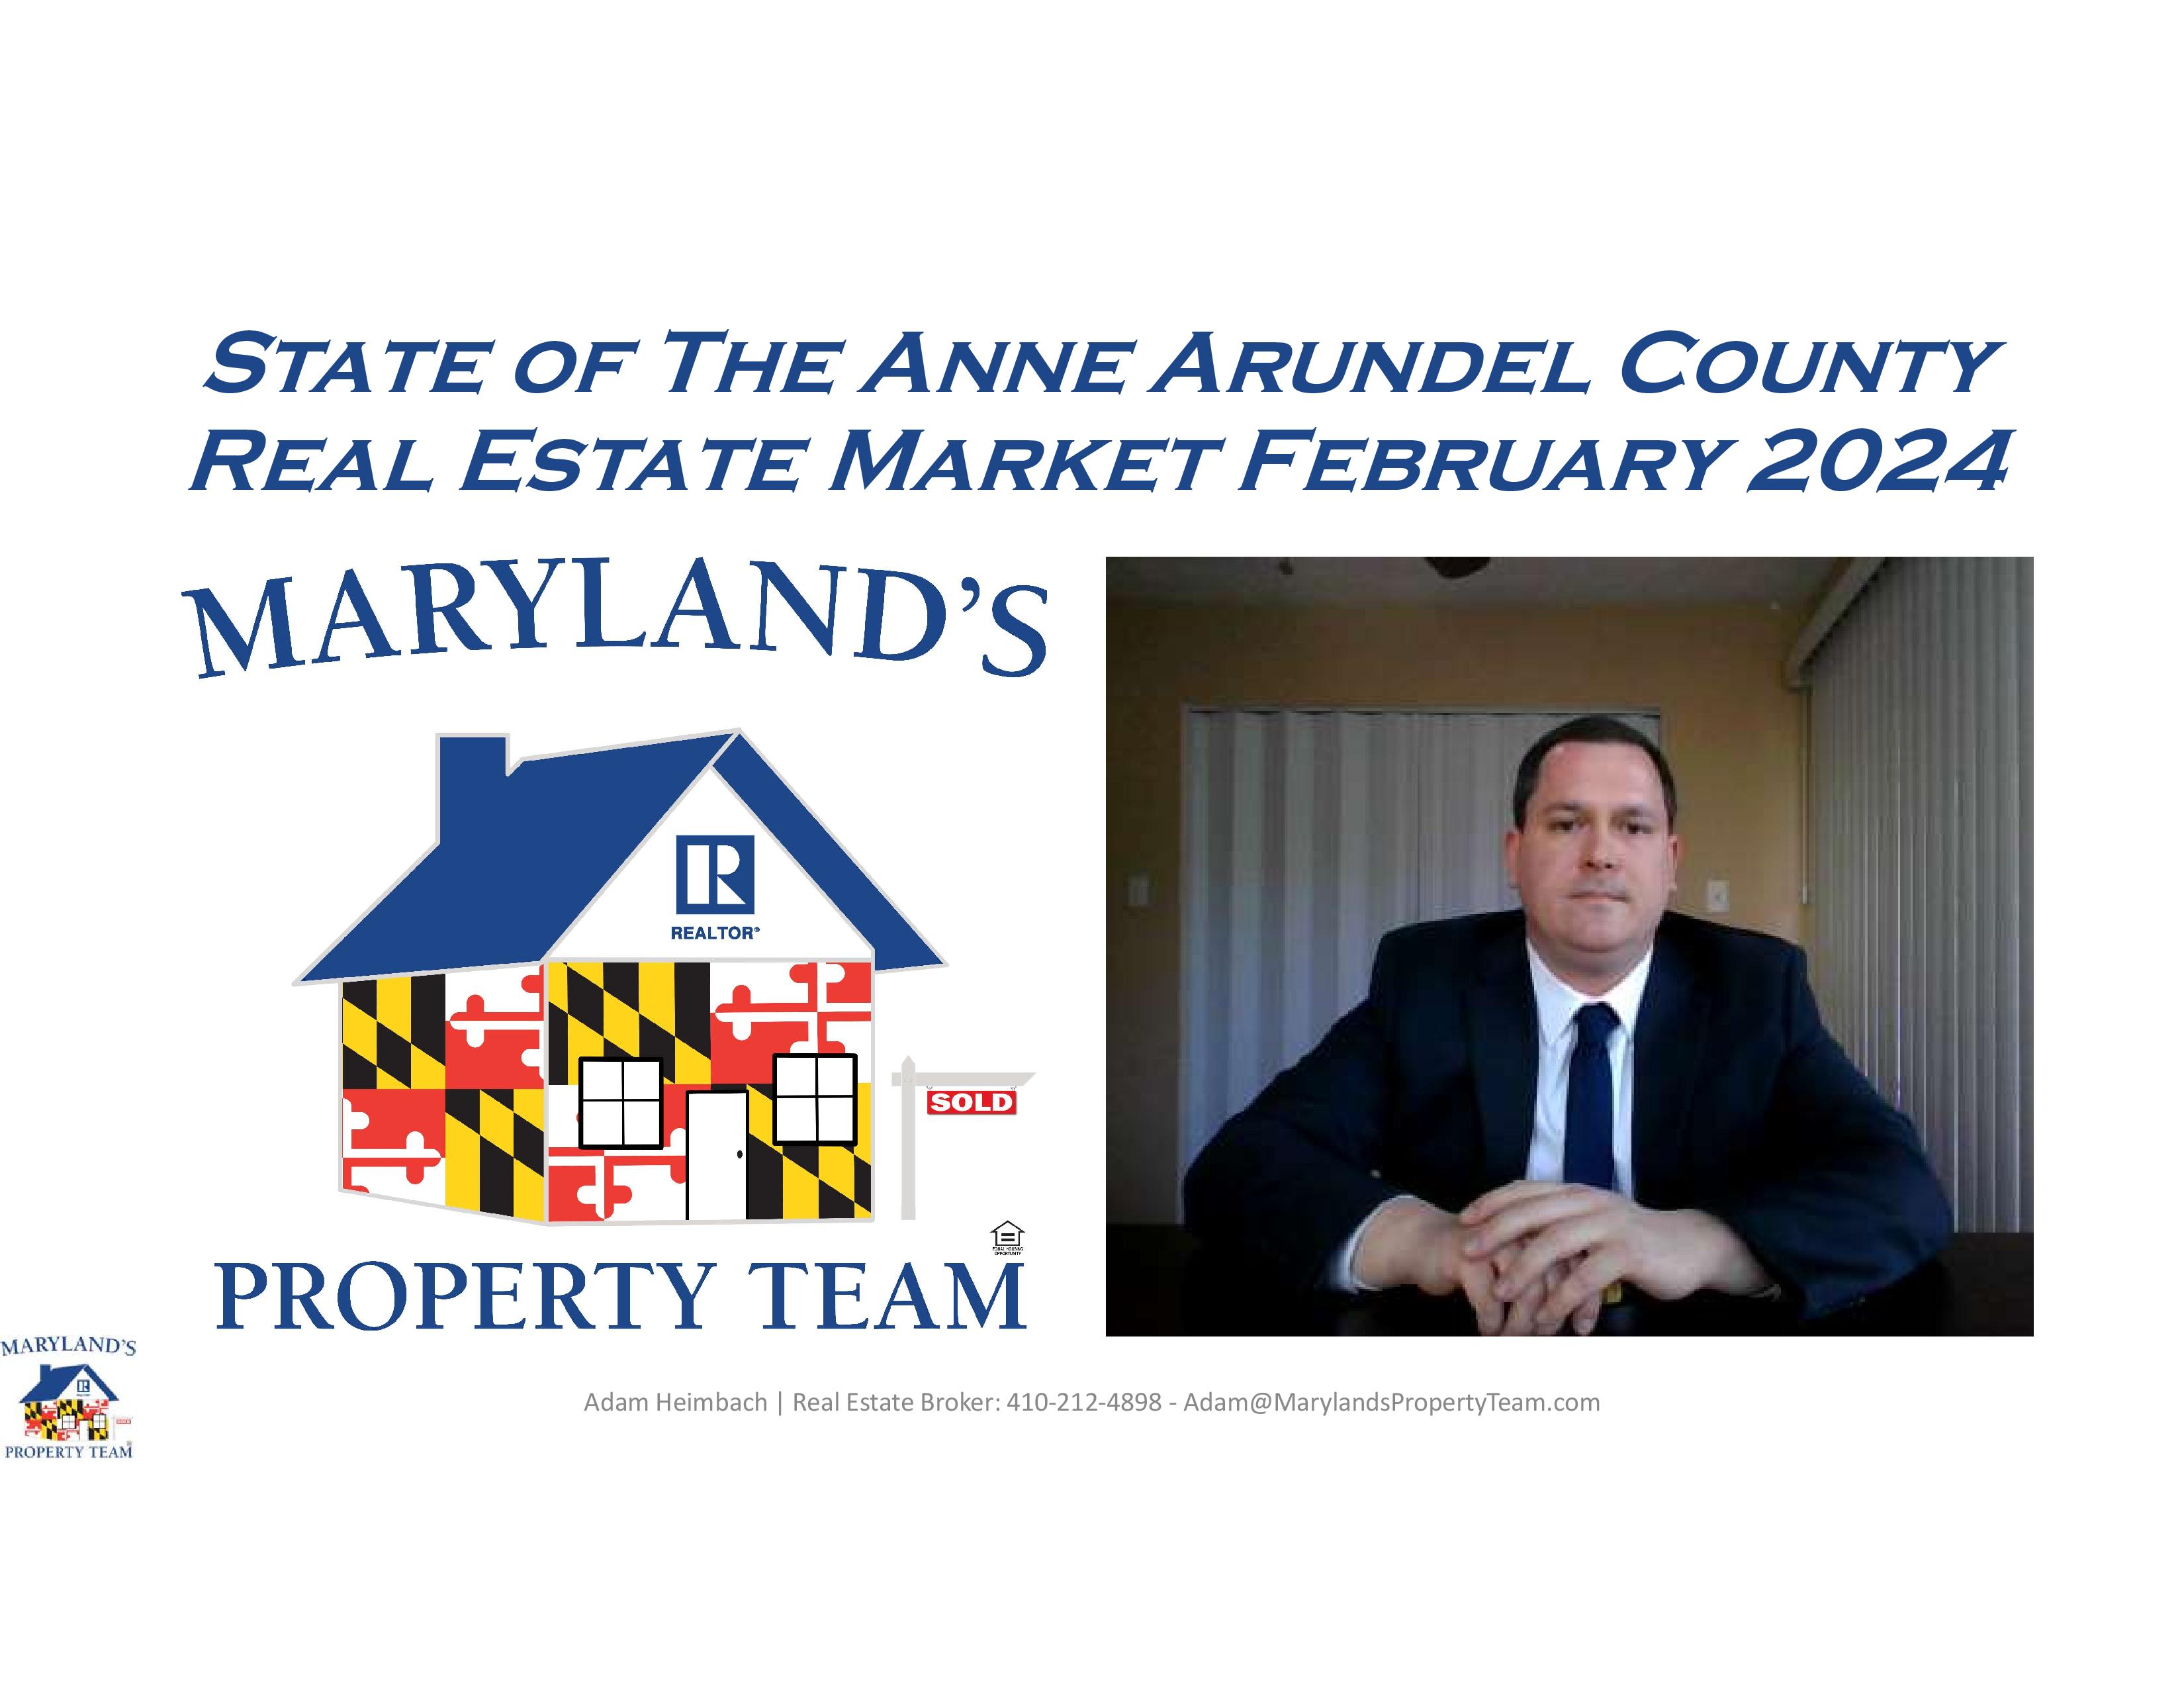 State of the Anne Arundel County Real Estate Market February 2024